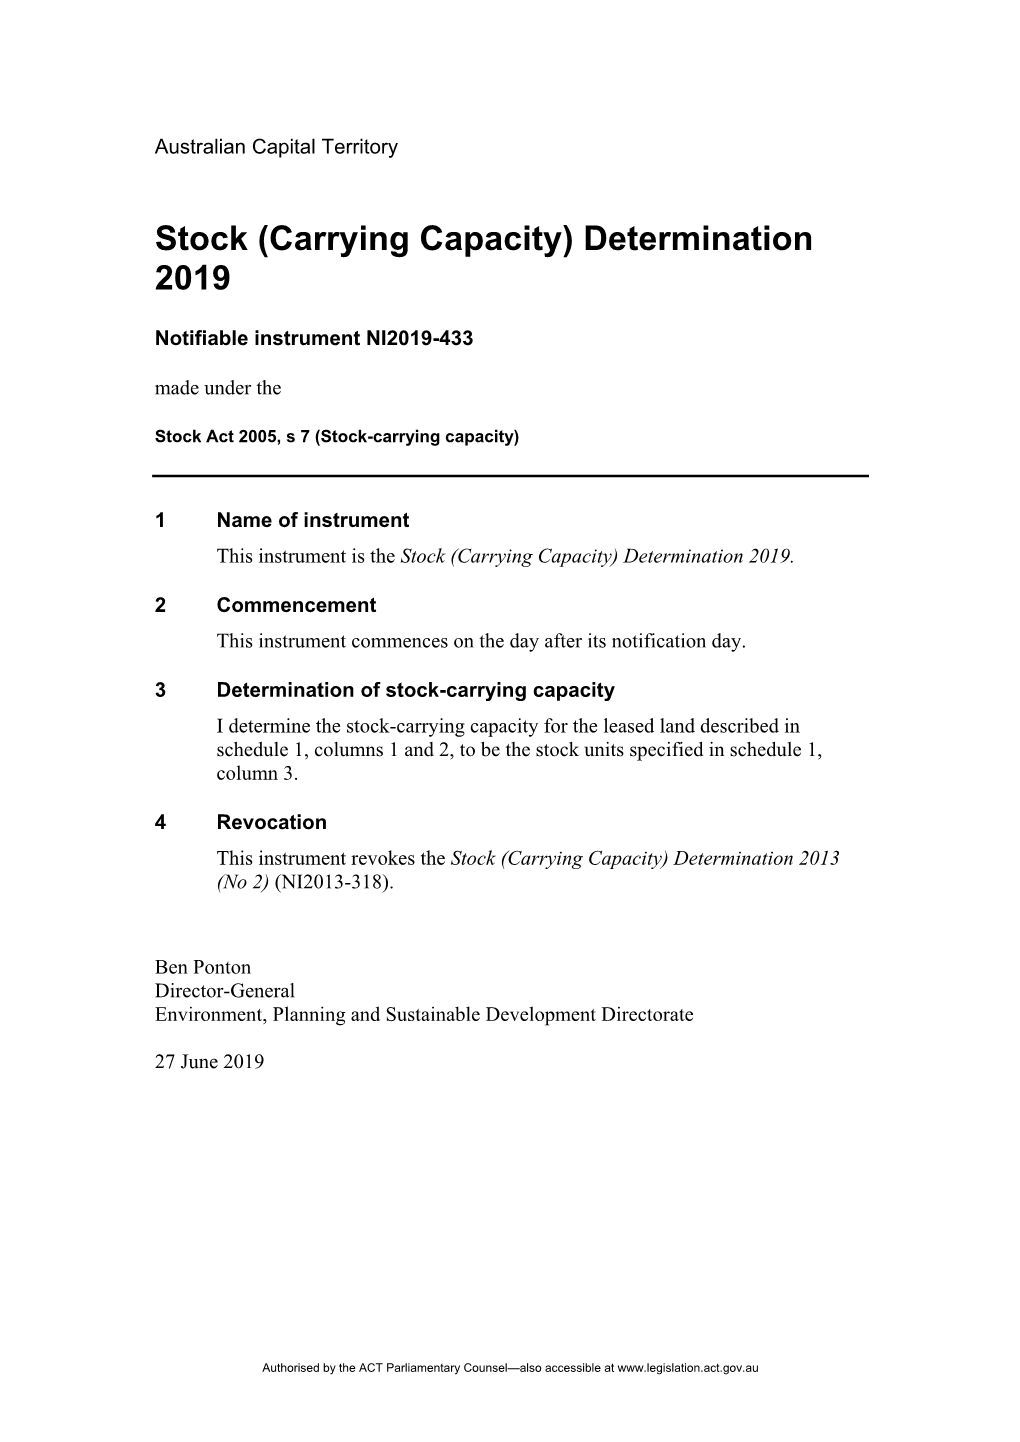 (Carrying Capacity) Determination 2019